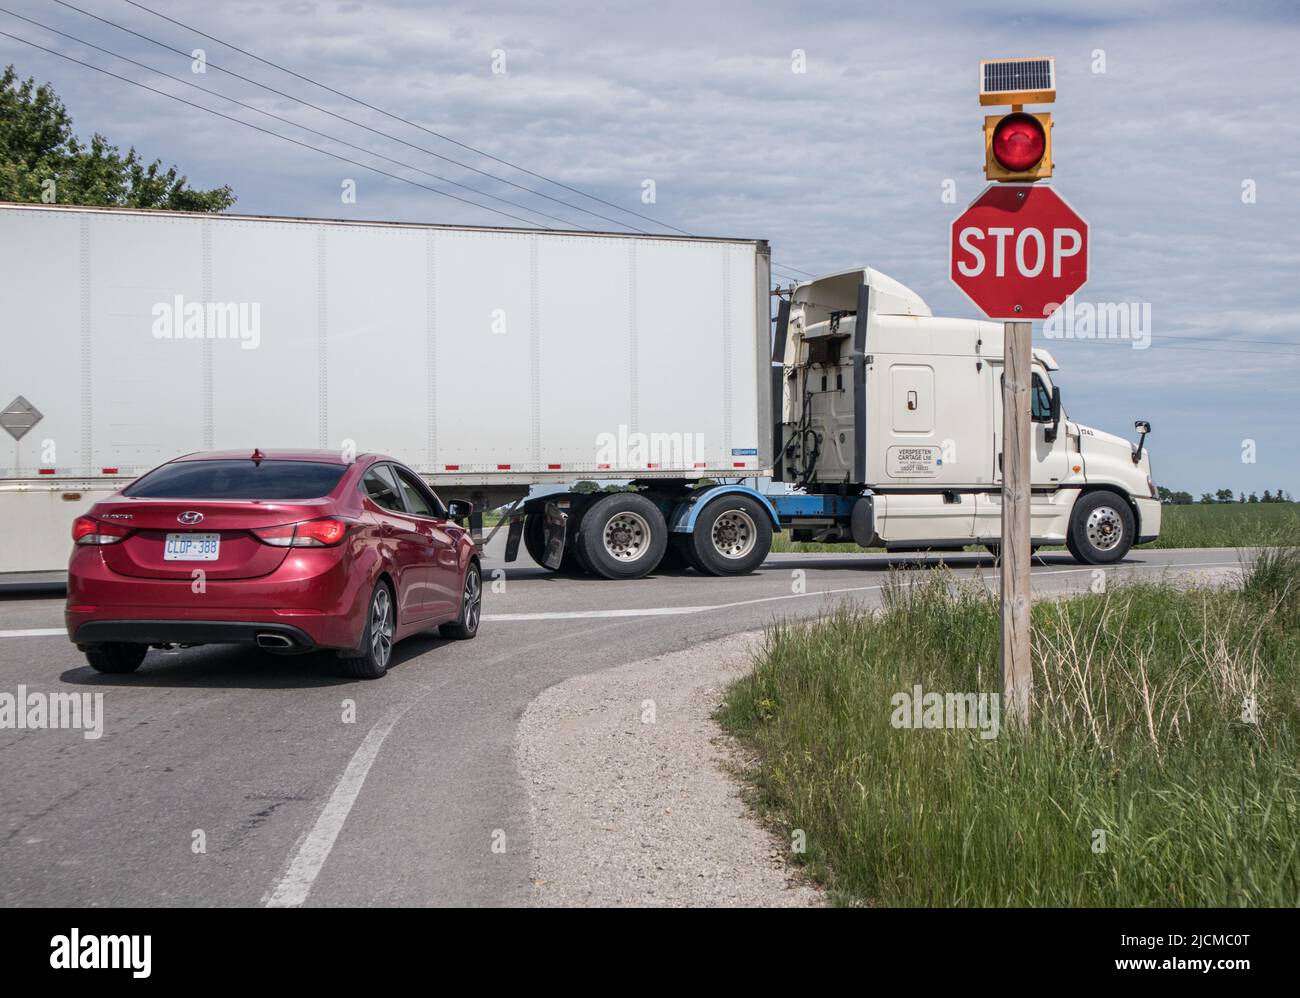 STOP signage with red light flashing, a big truck has priority. Stock Photo